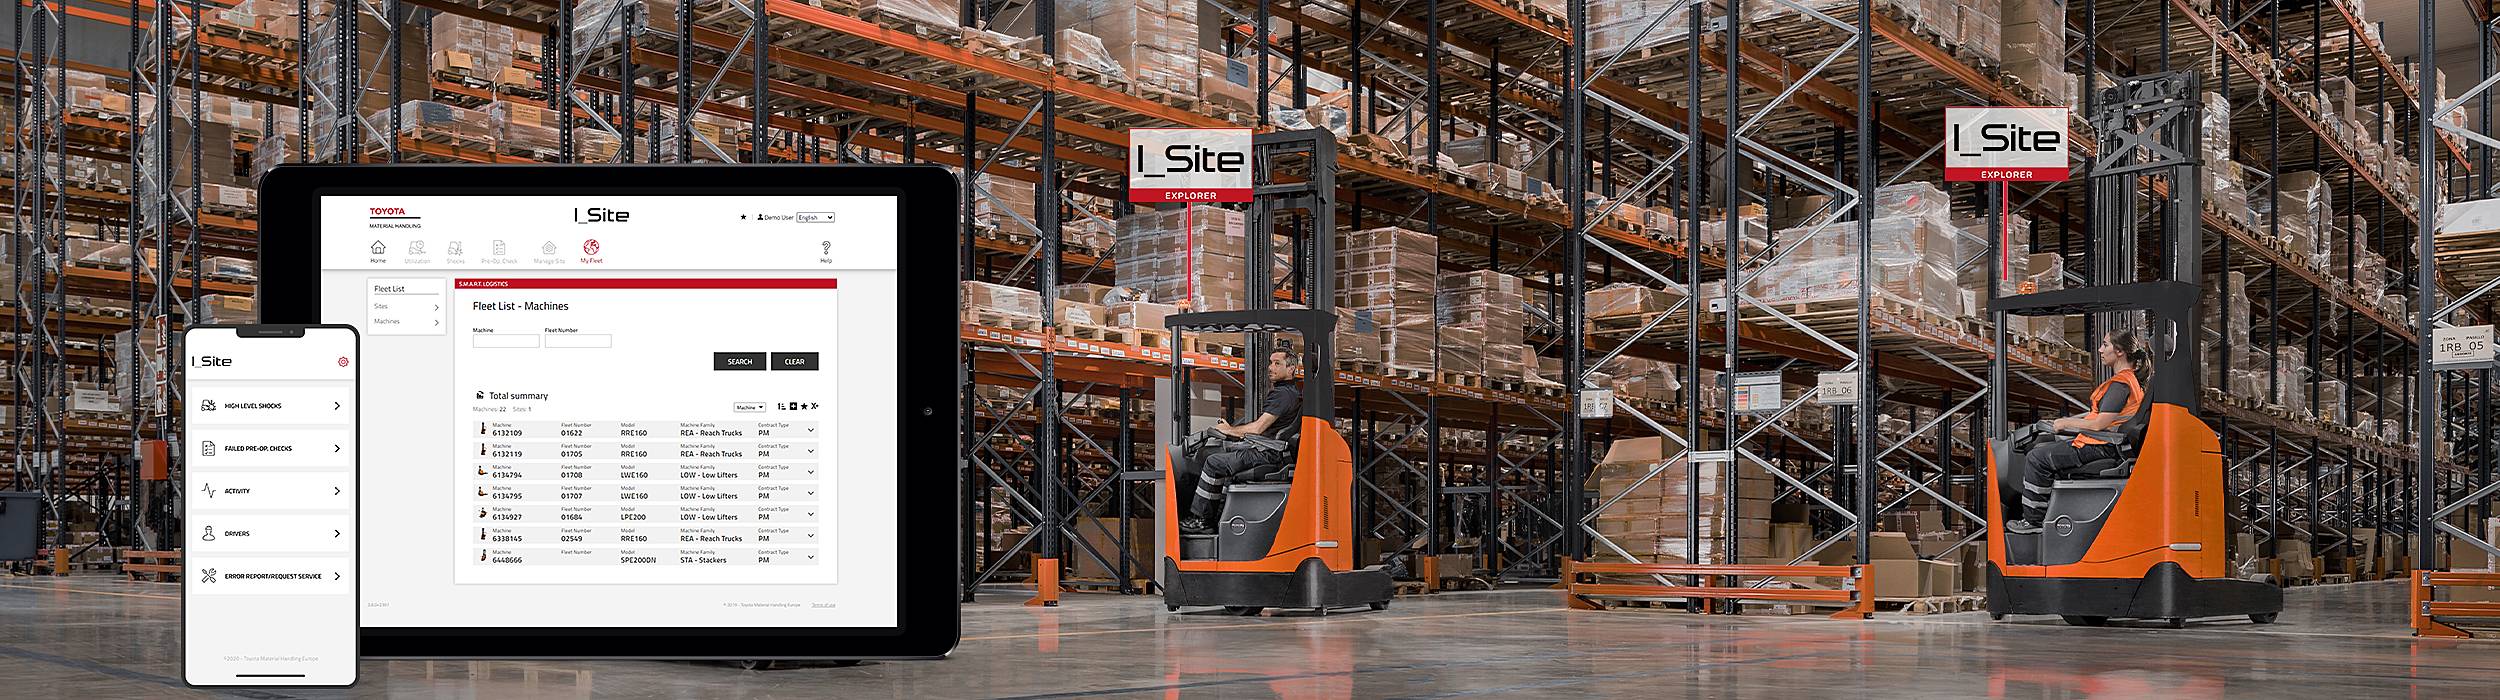 I_Site comes in three packages. With I_Site Starter you get, for free, access to the service app and keep track of your fleet's operating hours. The other two packages provide you with a complete cost or perfomance overview of your forklift fleet.